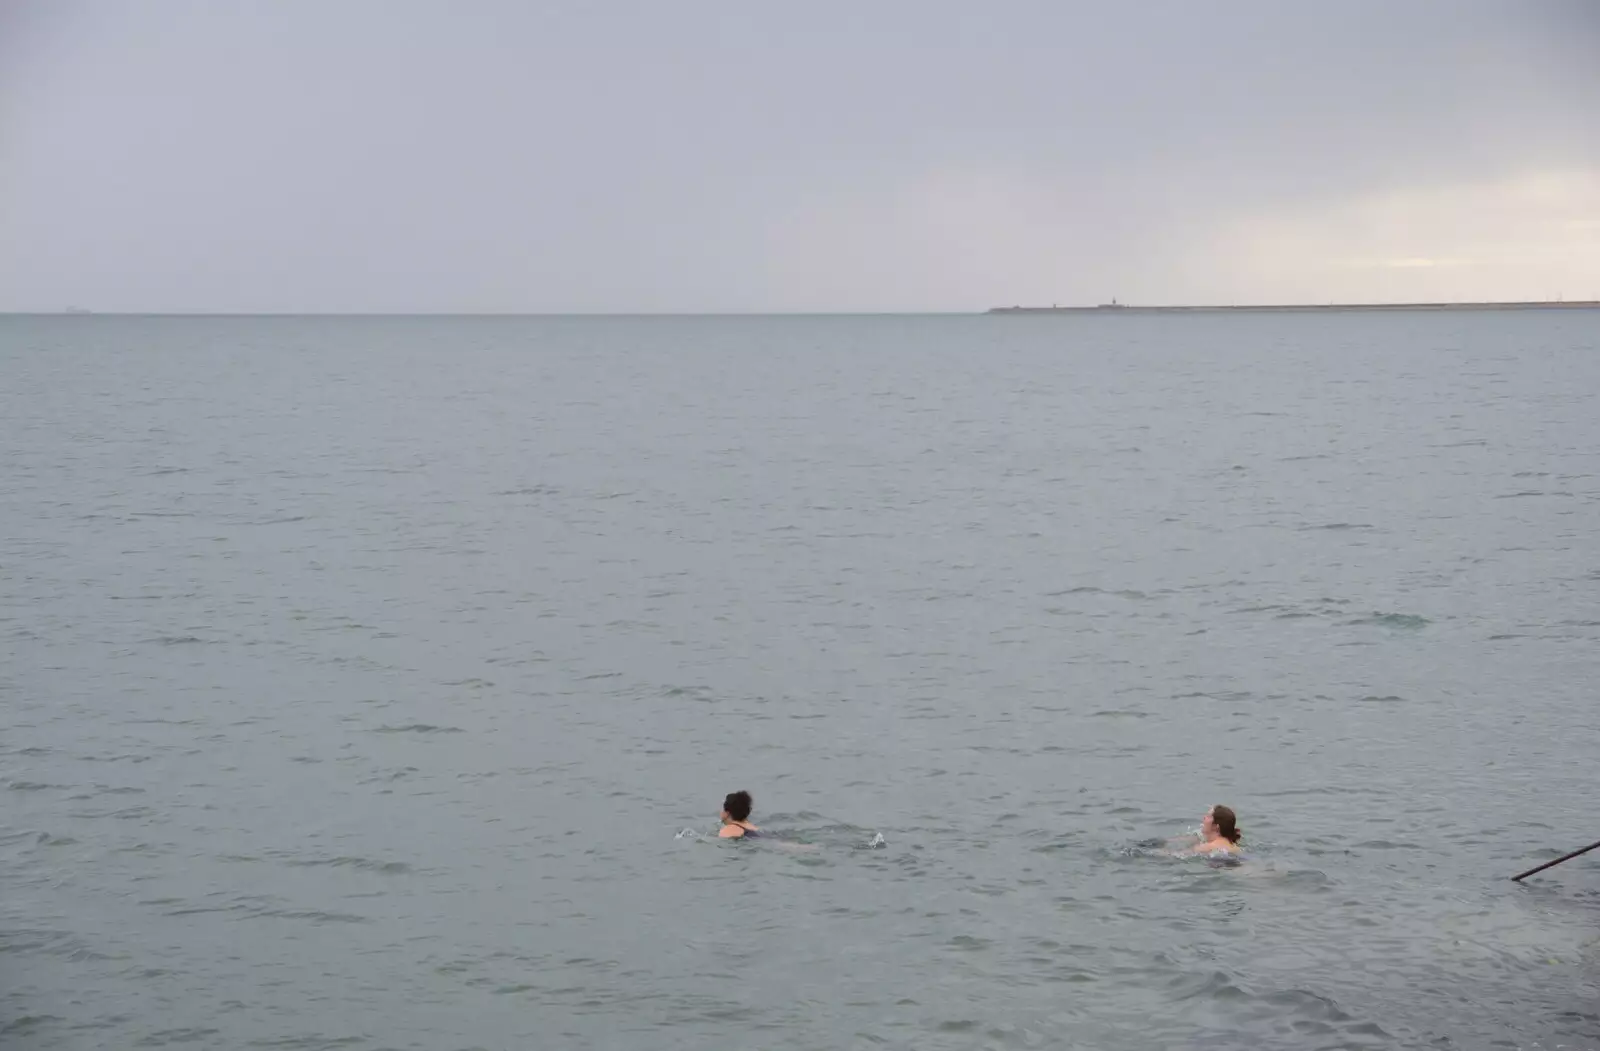 Evelyn and Isobel are in the sea again, from The End of the Breffni, Blackrock, Dublin - 18th February 2023